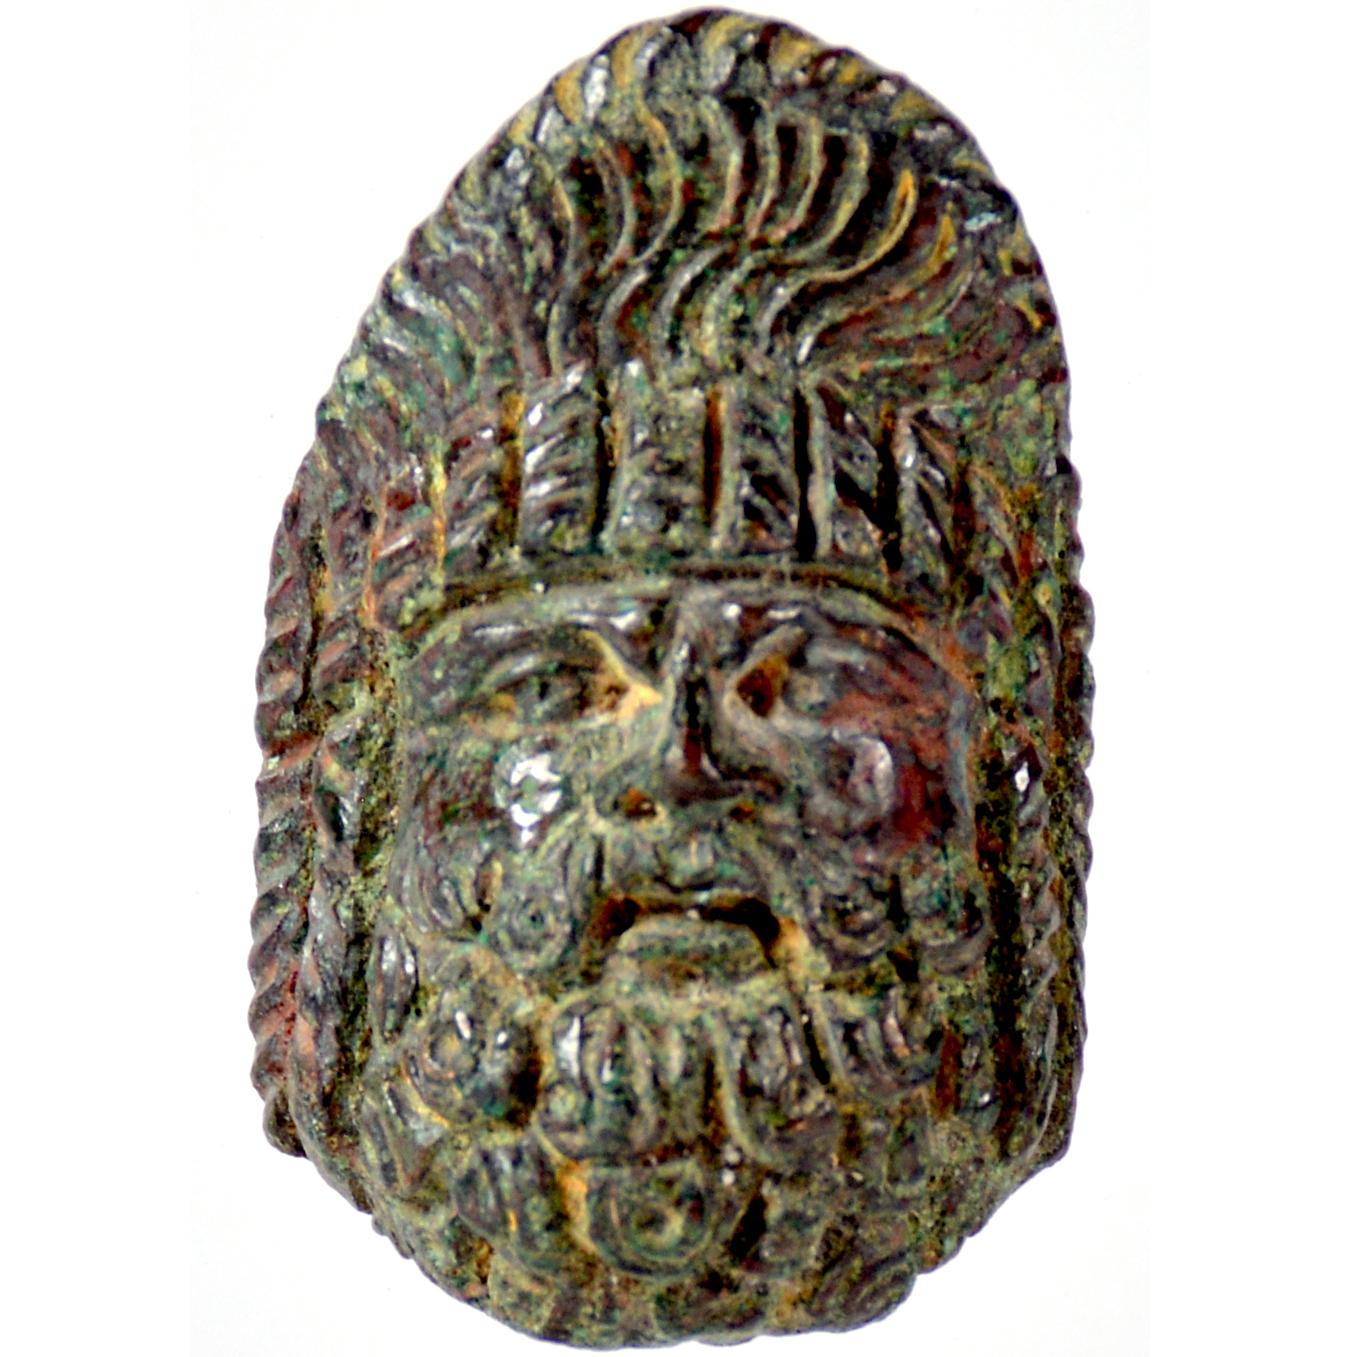 Mask of a bearded deity, short beard and hair braided in the characteristic high hairstyle, with layered ringlets on either side.

4 cm (h)

Green patina

Ex Canadian private property, Mr. M.M., collected 1960’s